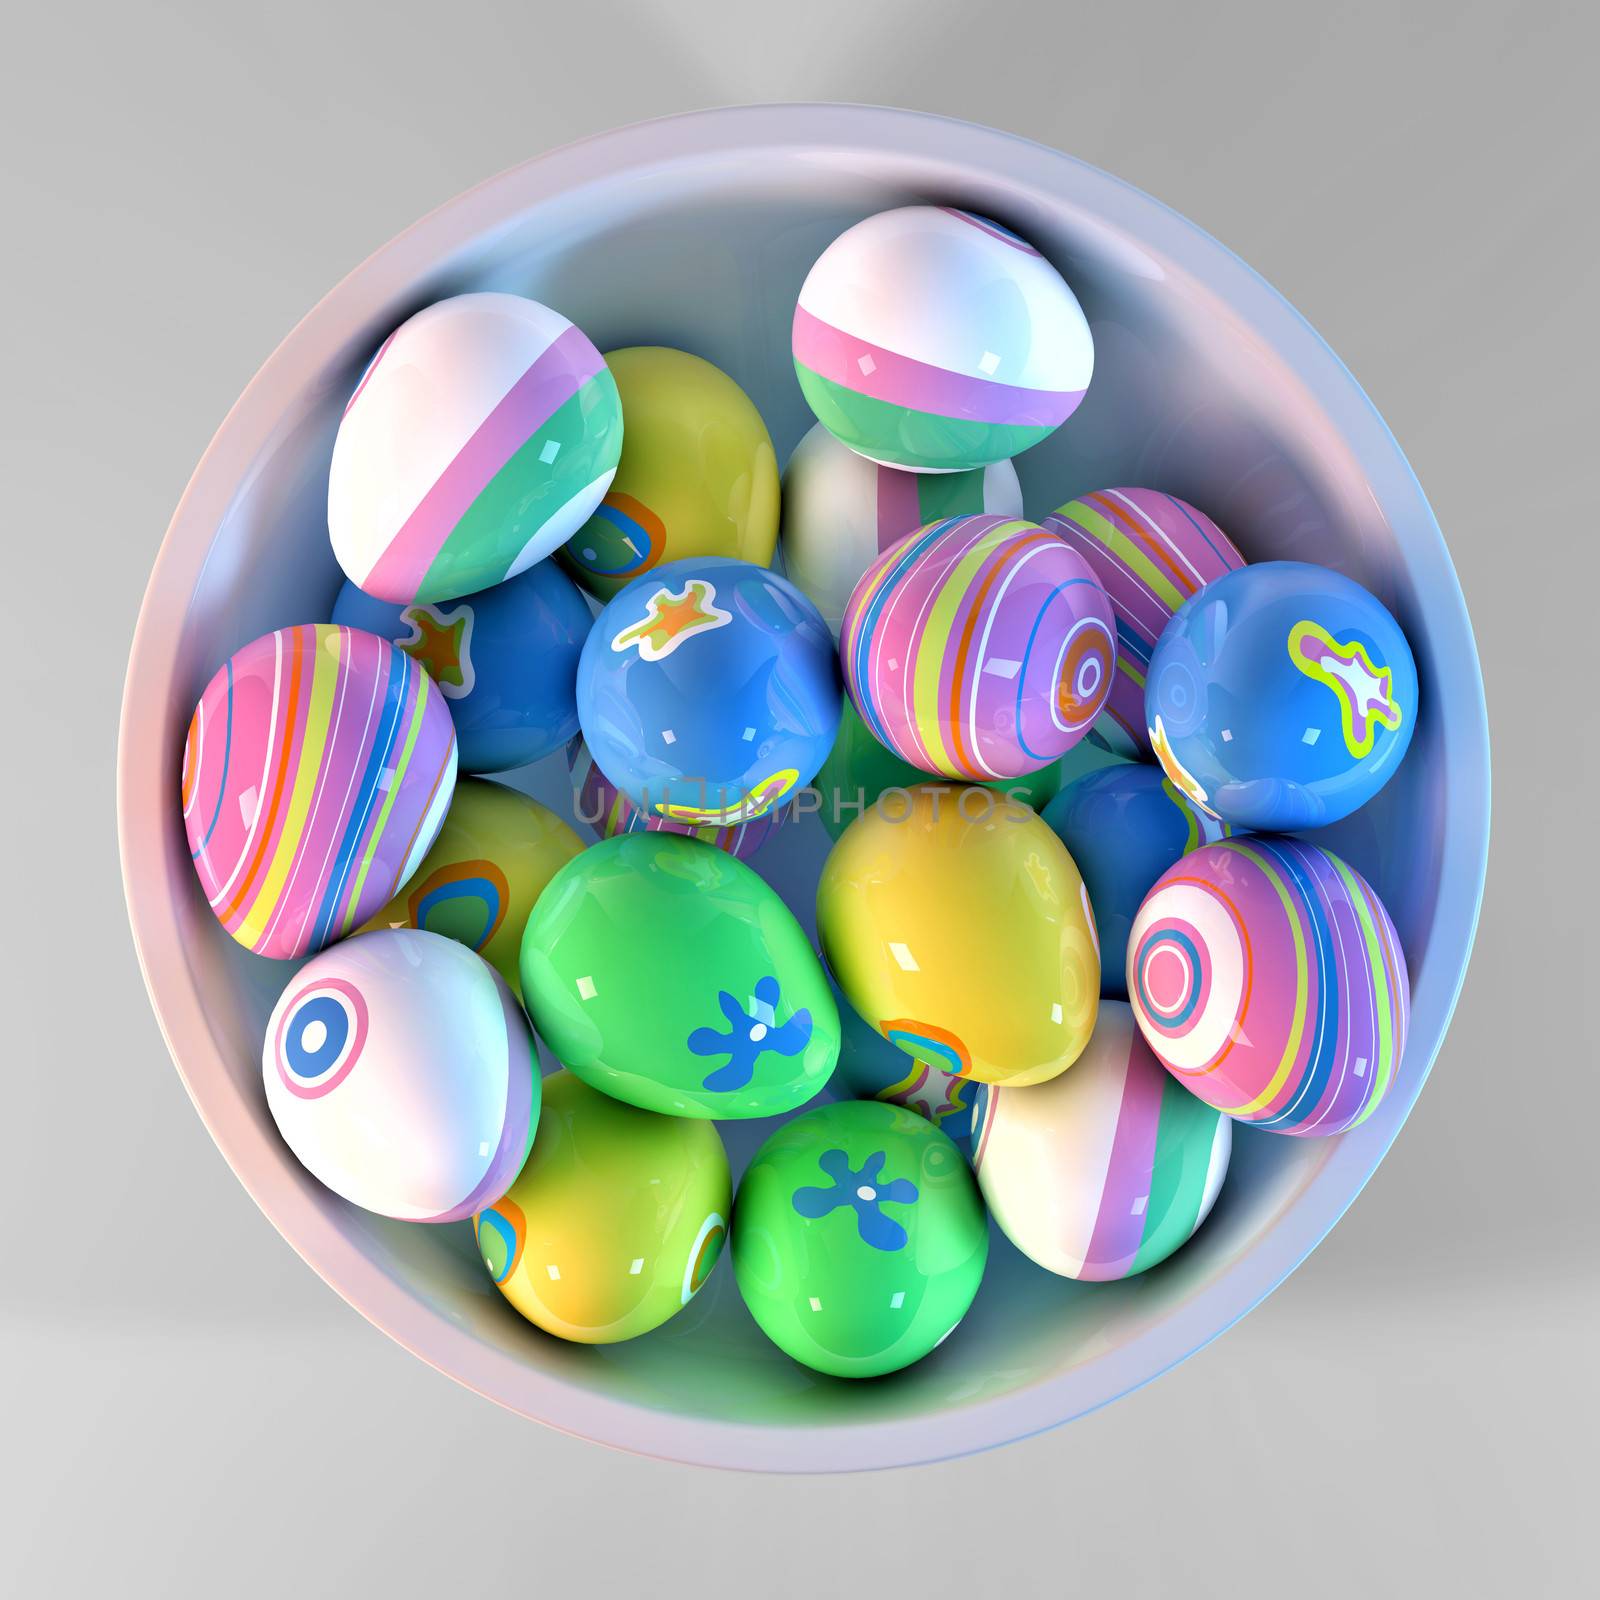 Bowl filled with easter eggs by dynamicfoto